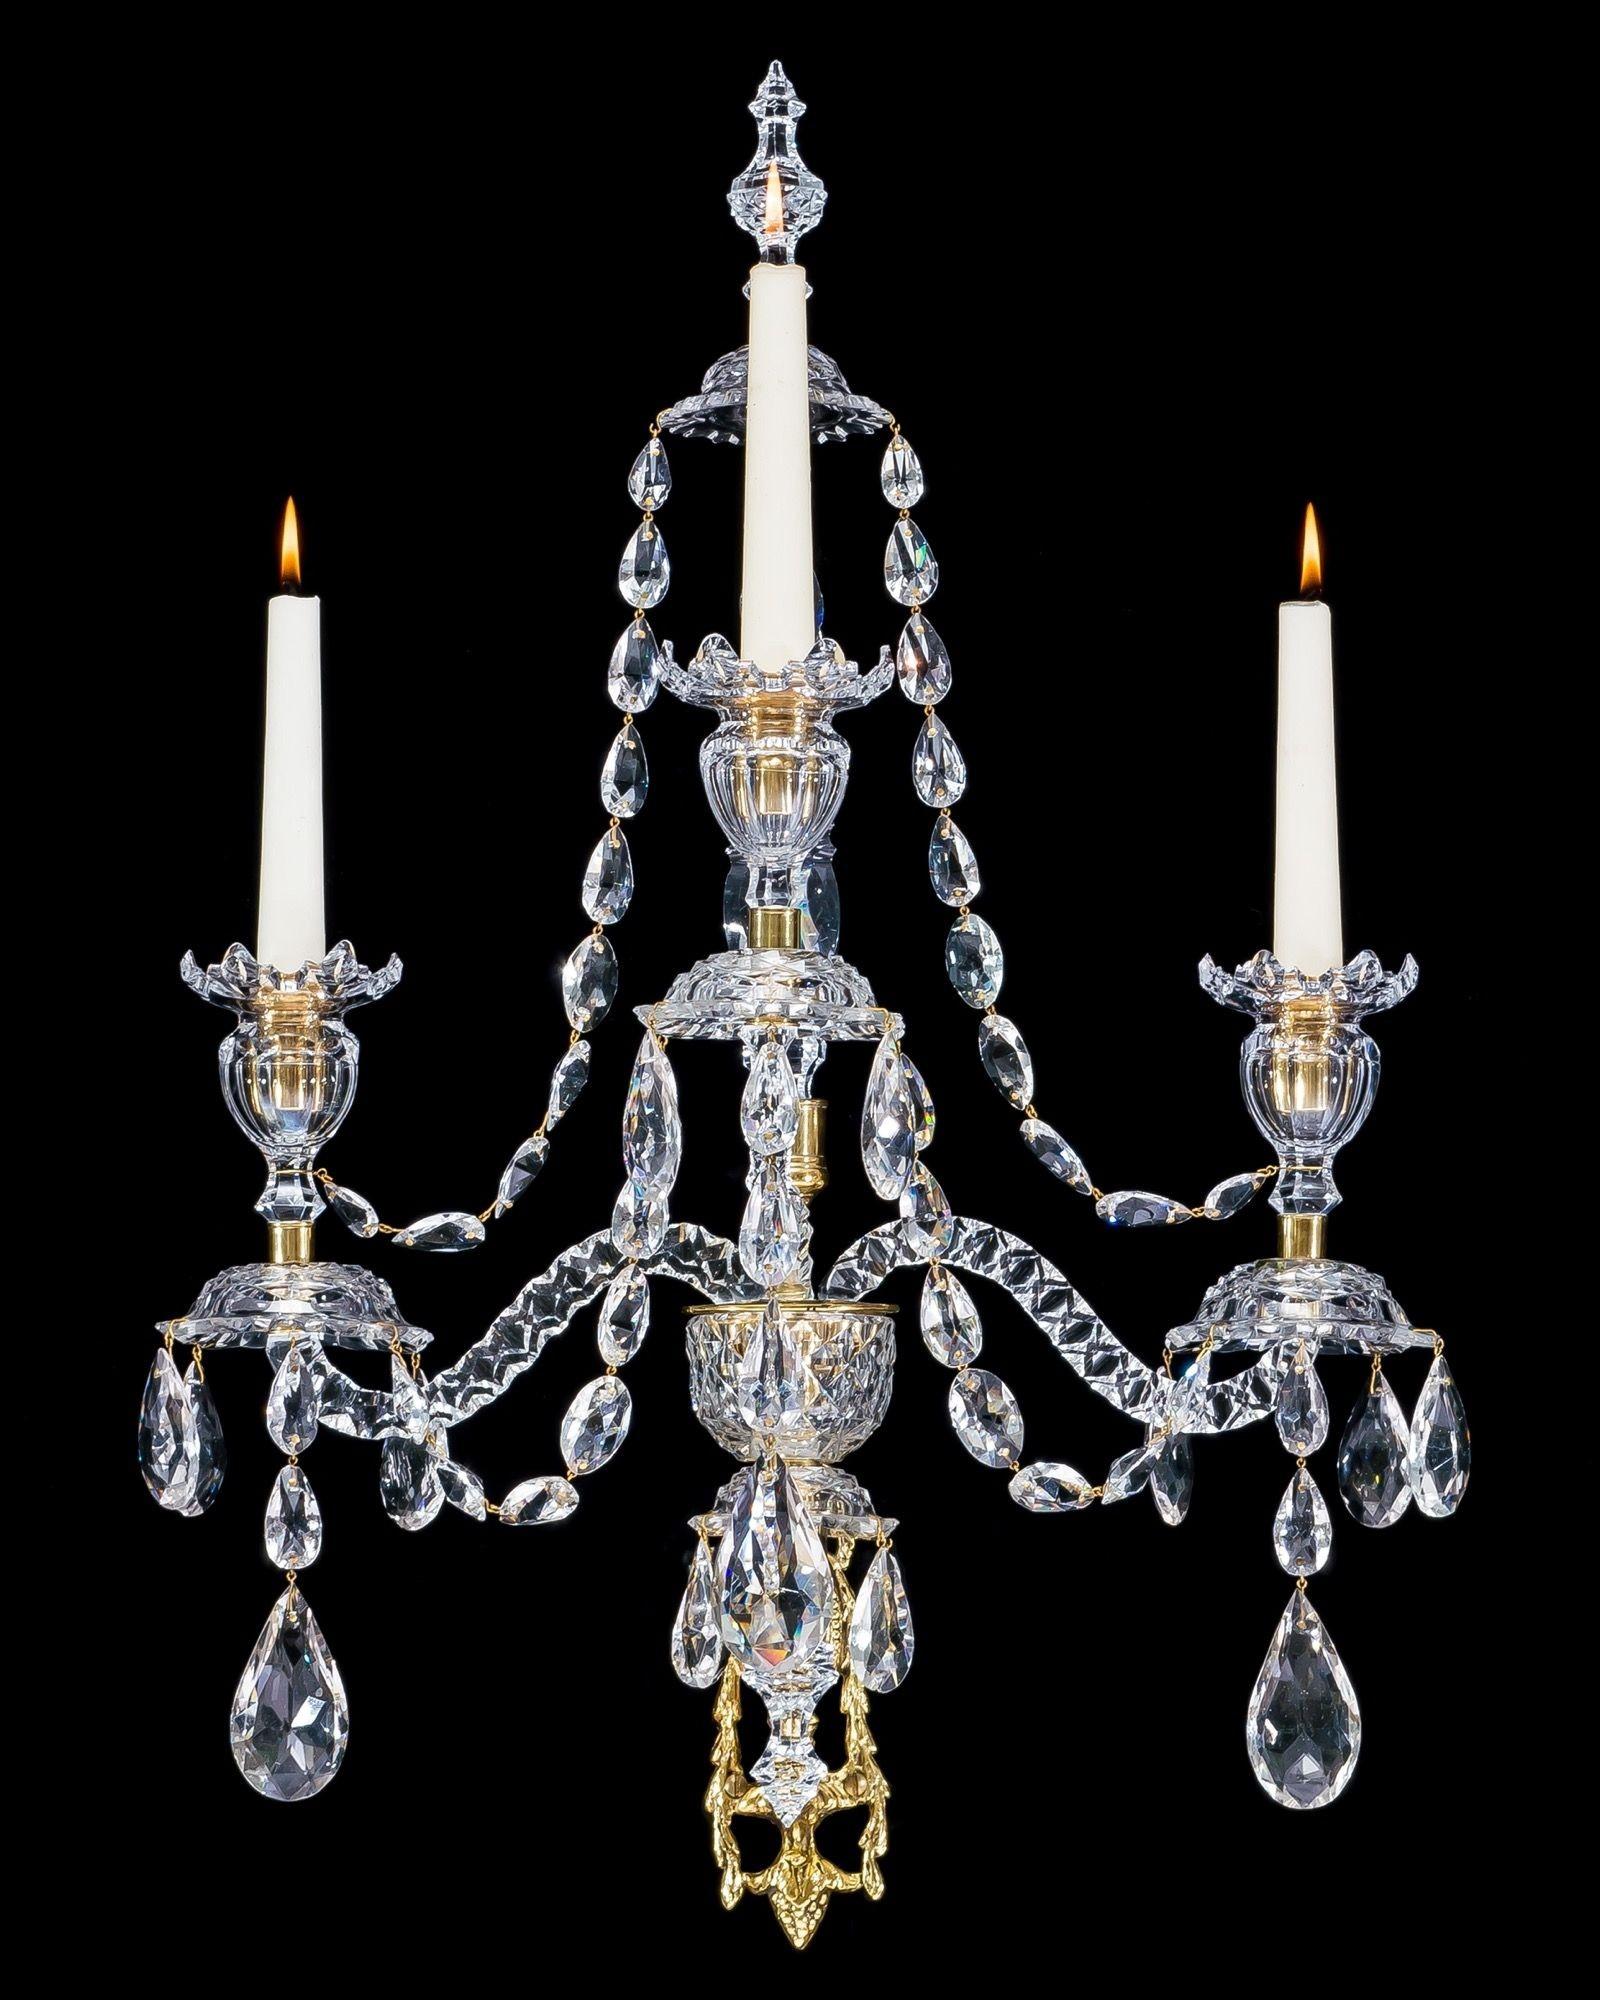 German A Pair Of Neoclassical Cut Glass Wall Lights Attributed To Werner & Mieth For Sale